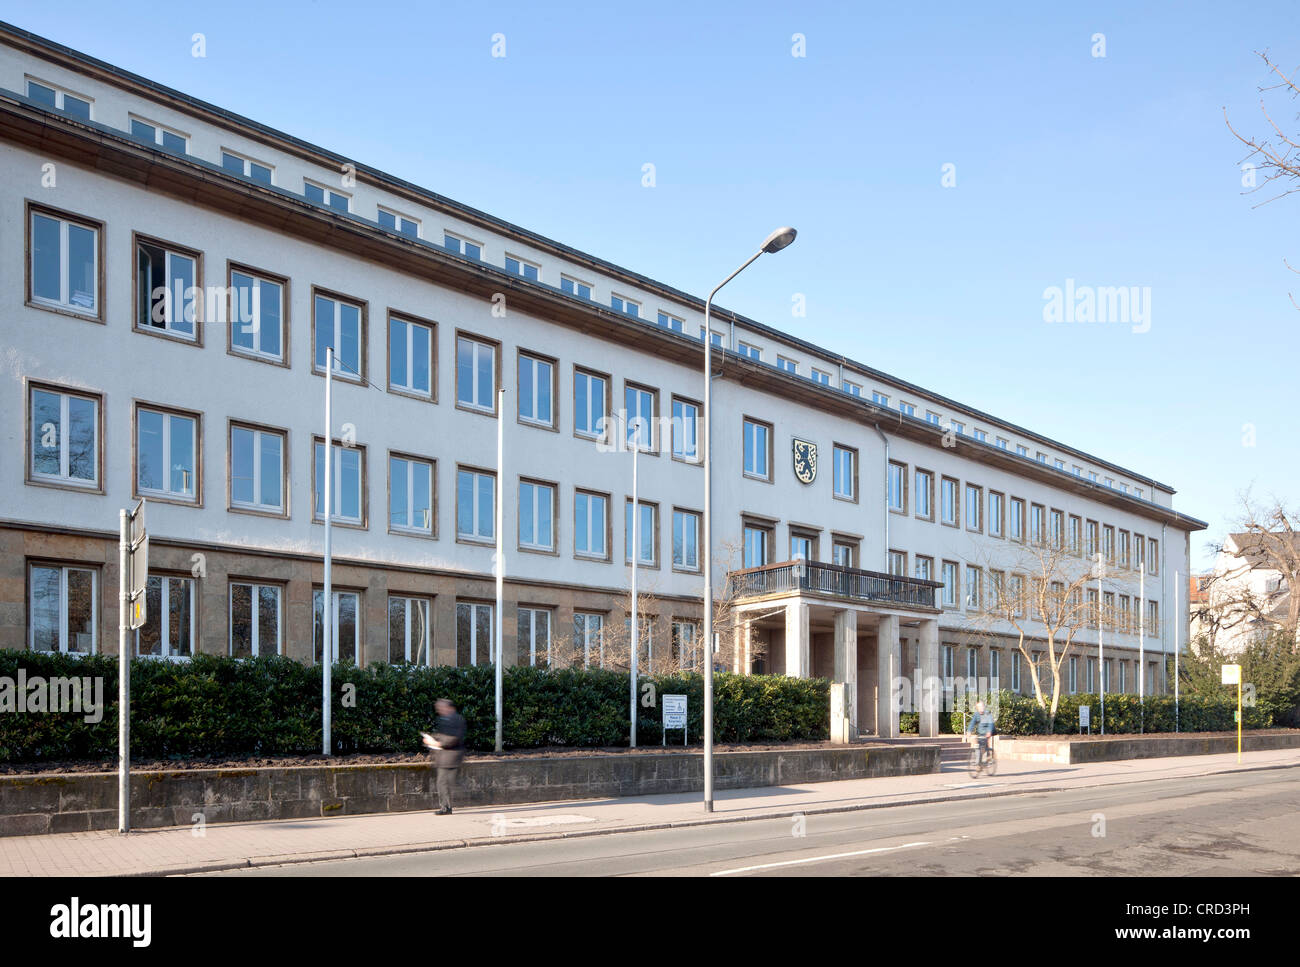 City Council, Weimar, Thuringia, Germany, Europe, PublicGround Stock Photo